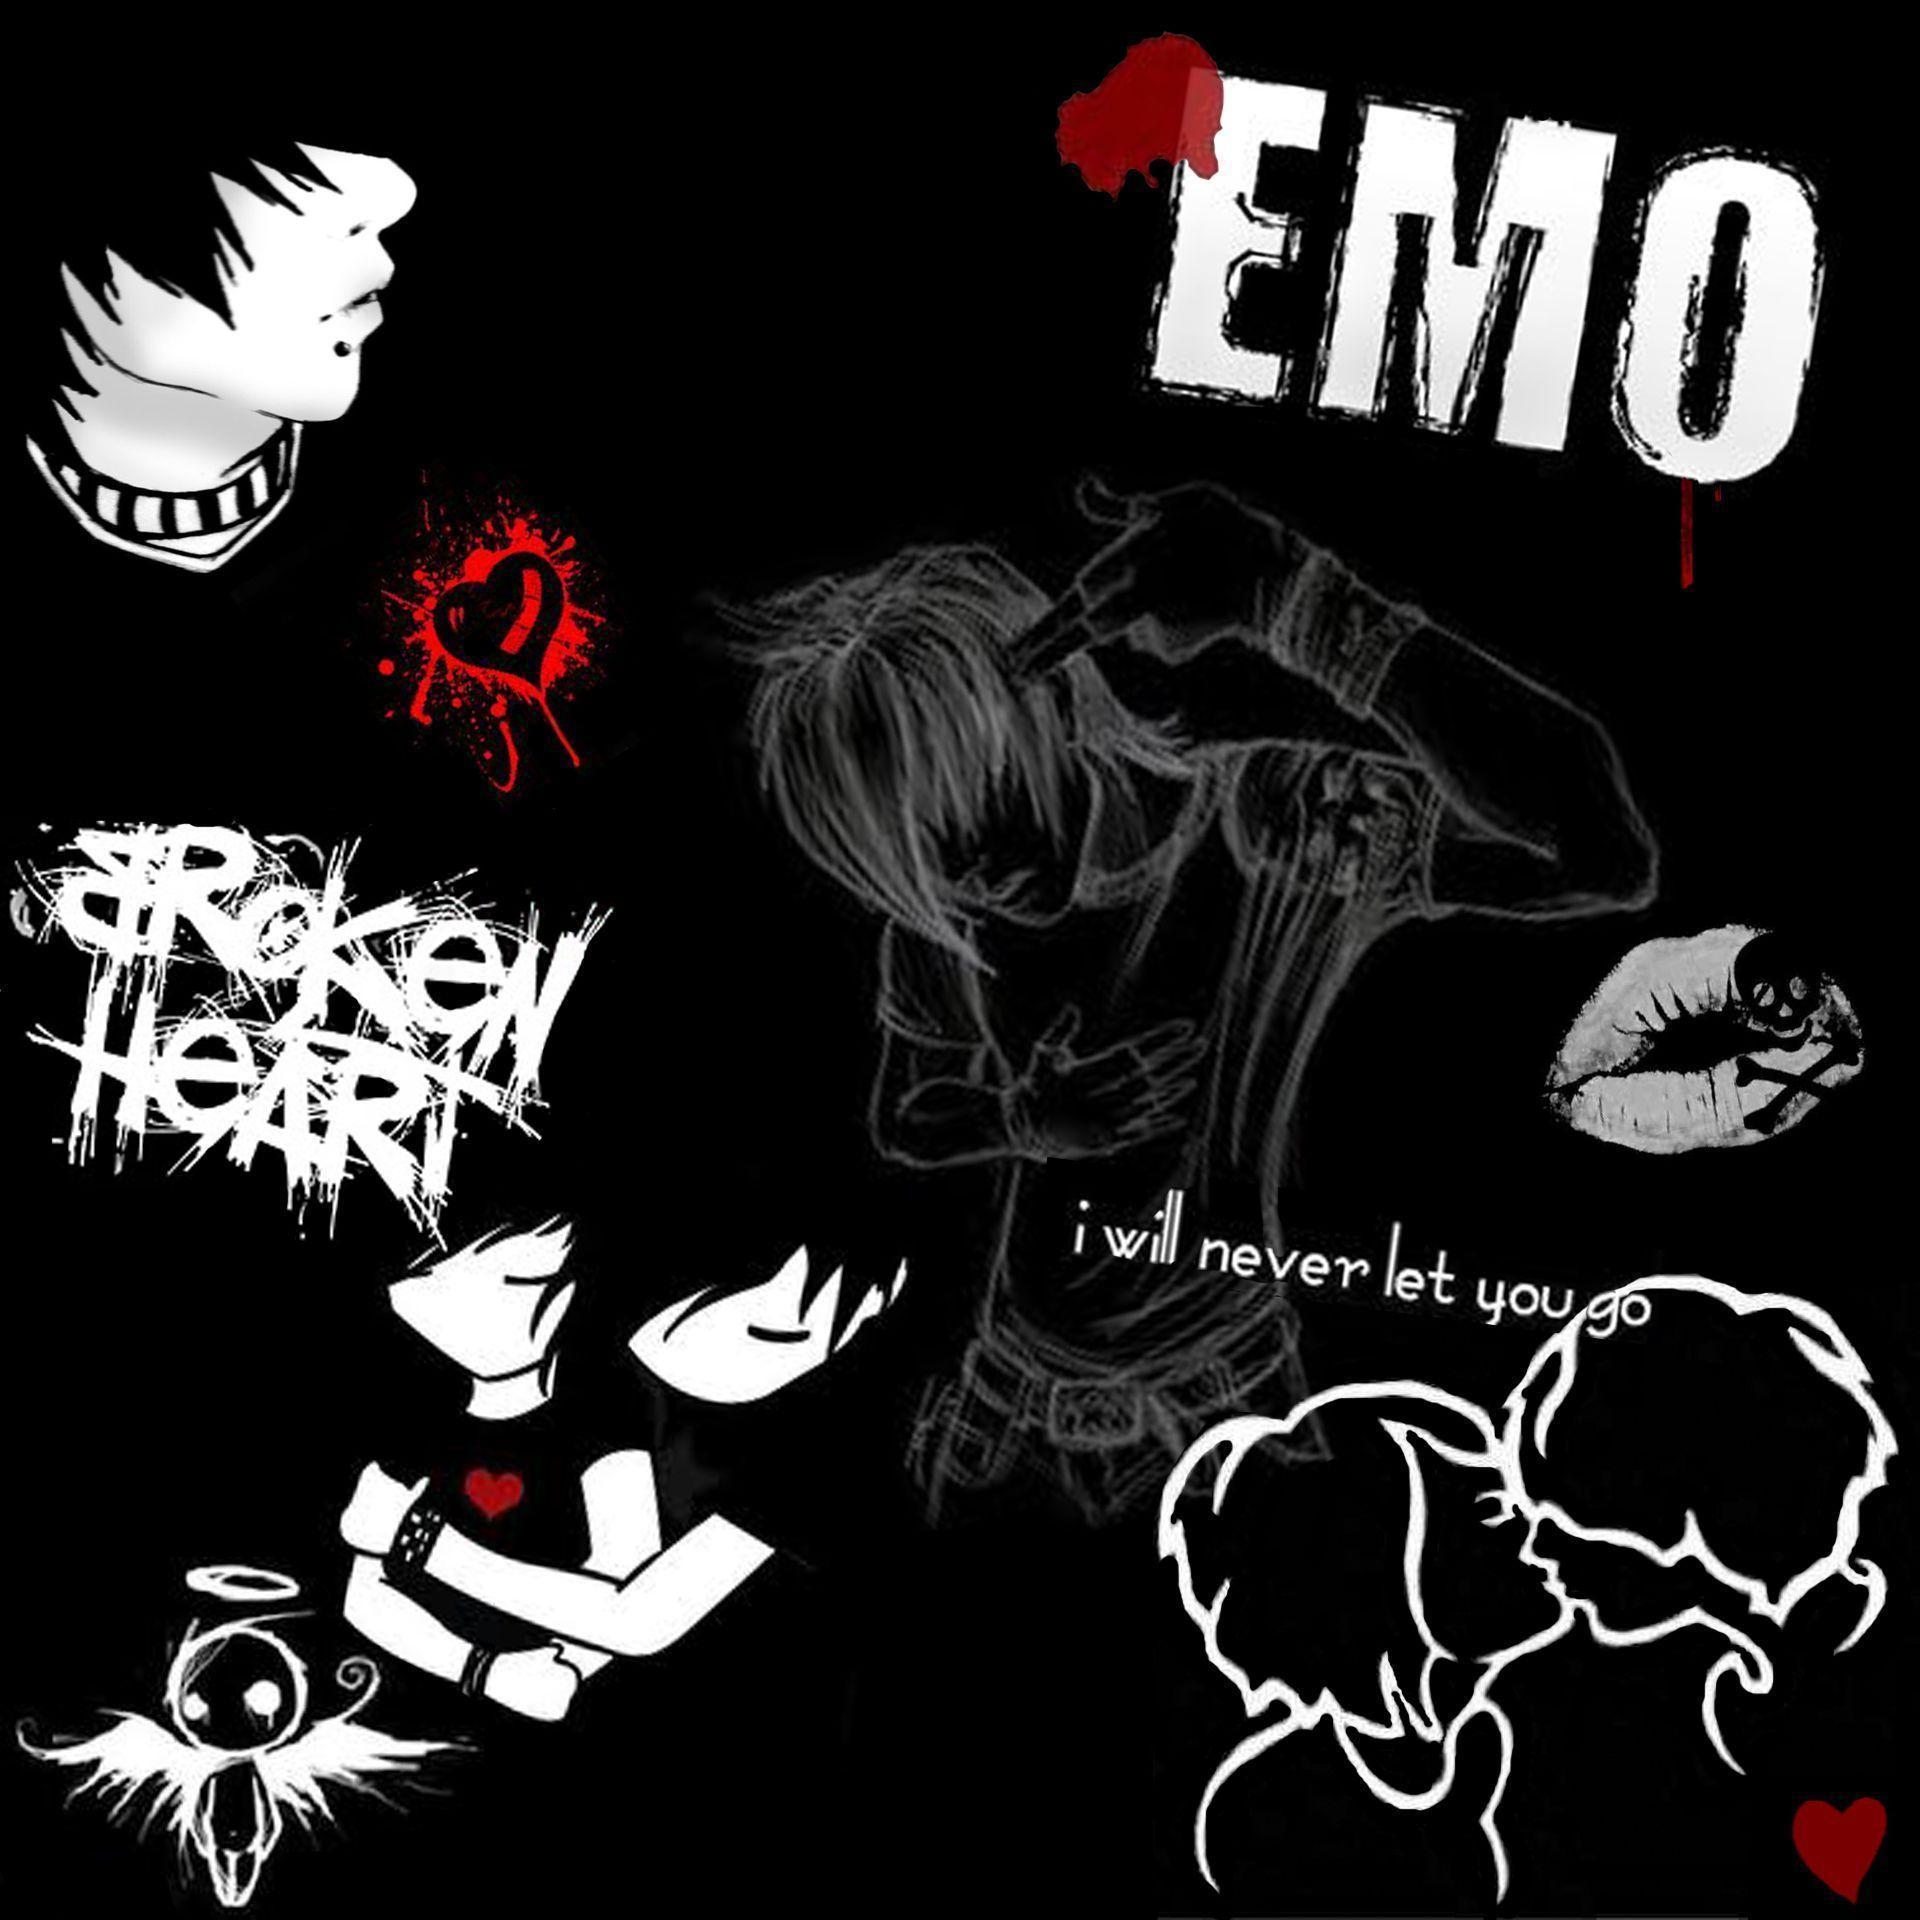 Free download Emo Wallpapers 54 Dark Wallpapers High Quality Black Gothic  FREE 1600x1200 for your Desktop Mobile  Tablet  Explore 50 Dark Emo  Wallpaper  Emo Boys Wallpapers Emo Background Free Emo Wallpapers